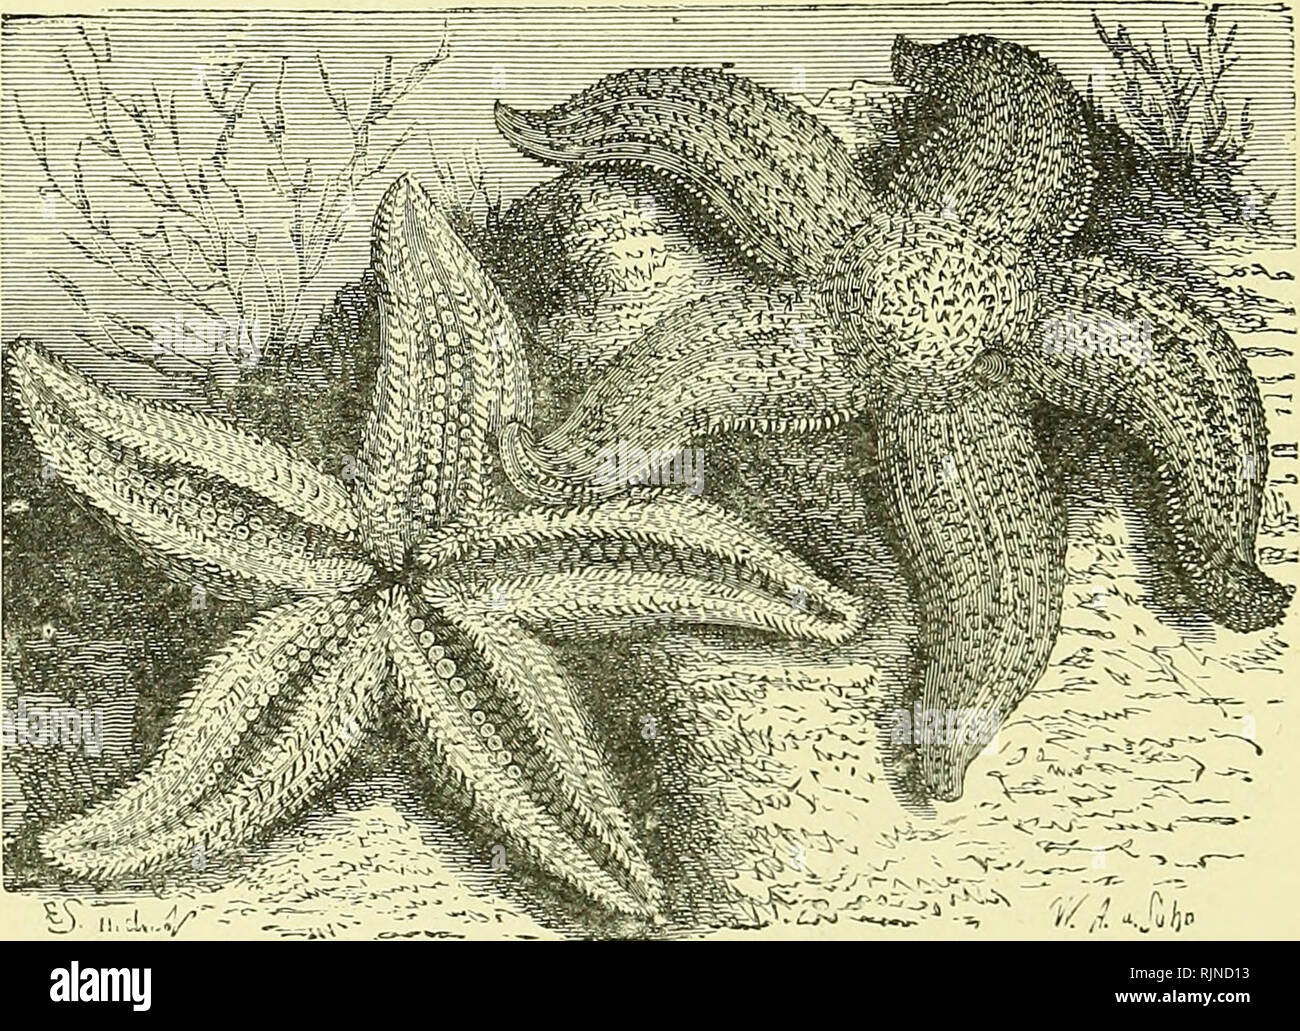 . Elementary text-book of zoology [electronic resource]. Zoology. 156 J R CHIC CEL OMA TA. CHAPTER XV. ARCHICCELOMA TA. I. —ASTERIAS. Phylum - - - - Archiccelo^iata. Class ----- Echinodermata. Order - - - - Asteroidea. Fig. 88.—isTERiAS Rubens.. (In the left the oral surface is seen with the five ambulacral grooves and tube-feet ; on the right is the aboral surface with the madreporite between the two lower arms. Asterias rubens (the starfish) is one of the commonest marine httoral animals. The body is of a dull yellow-red colour, flattened and produced into five equal-sized arms. This gives  Stock Photo